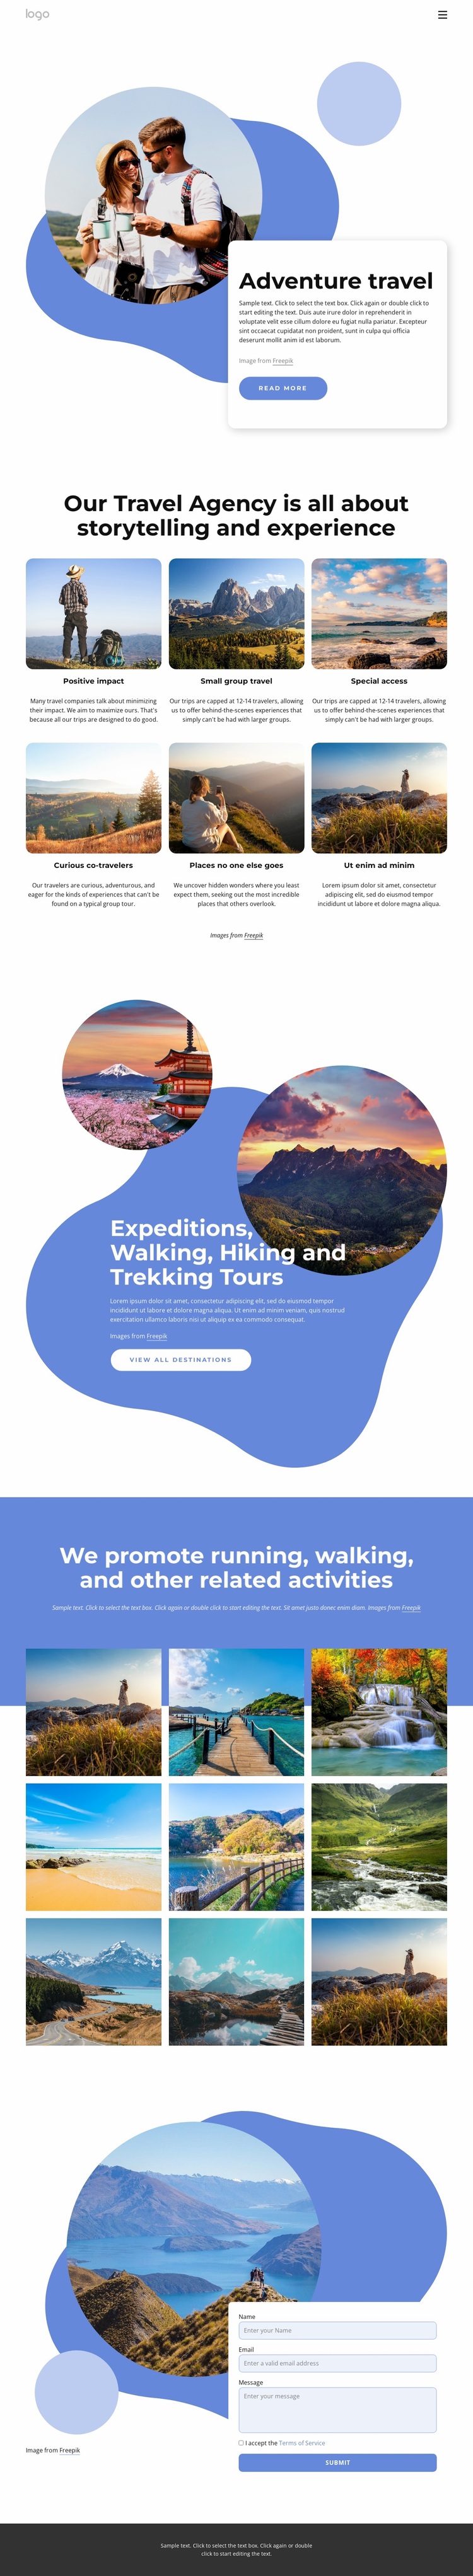 We are a full service travel agency Website Design